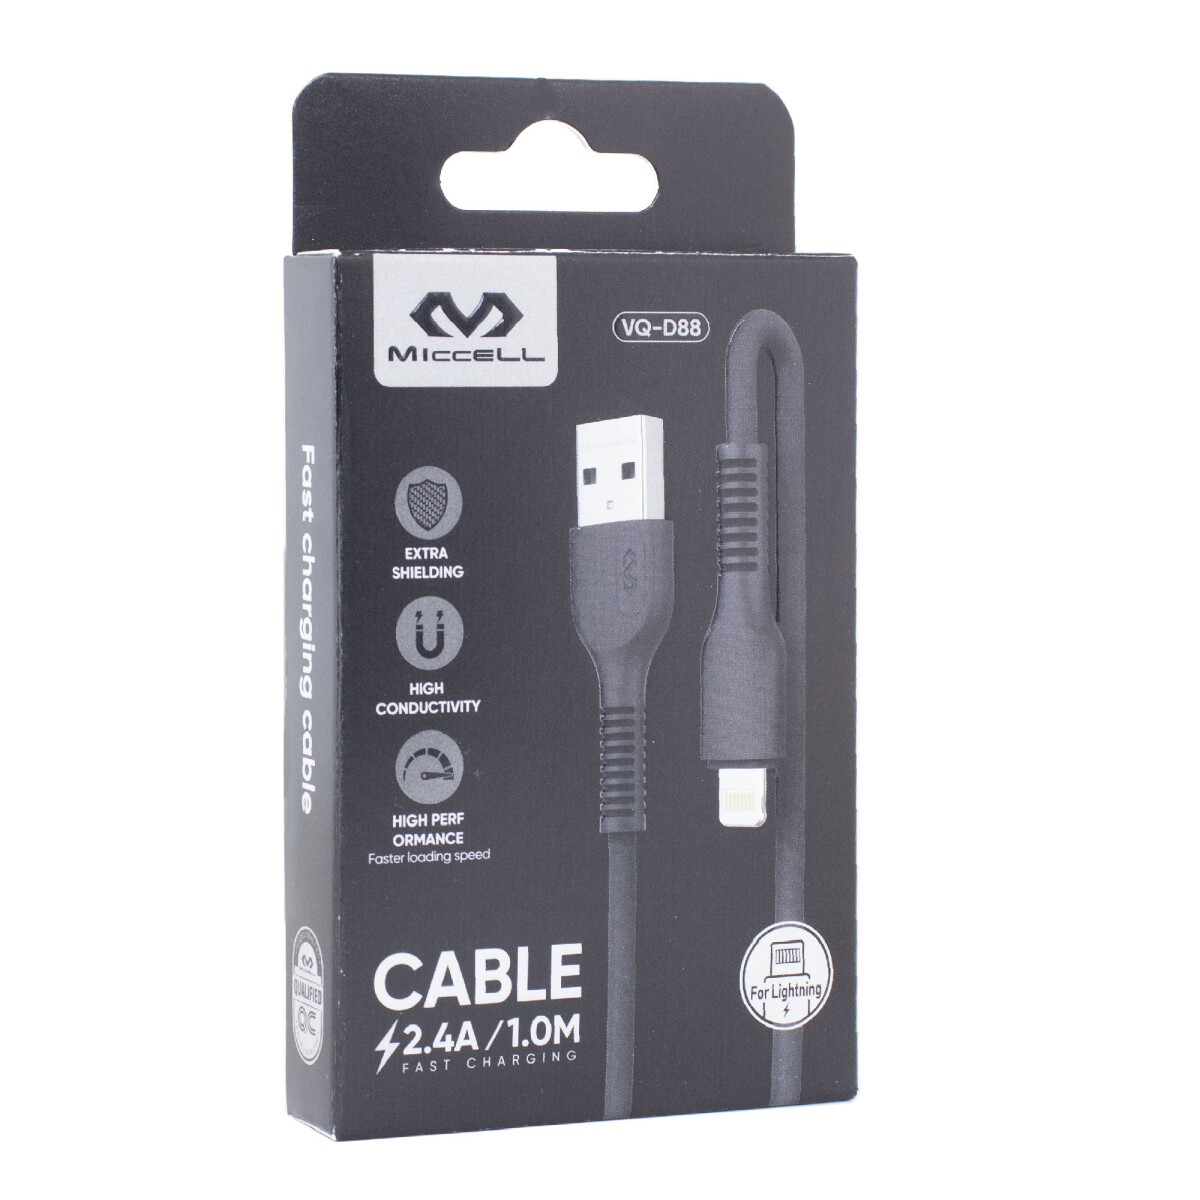 Cable Para iPhone Miccell 2.4a 1.0m Negro 